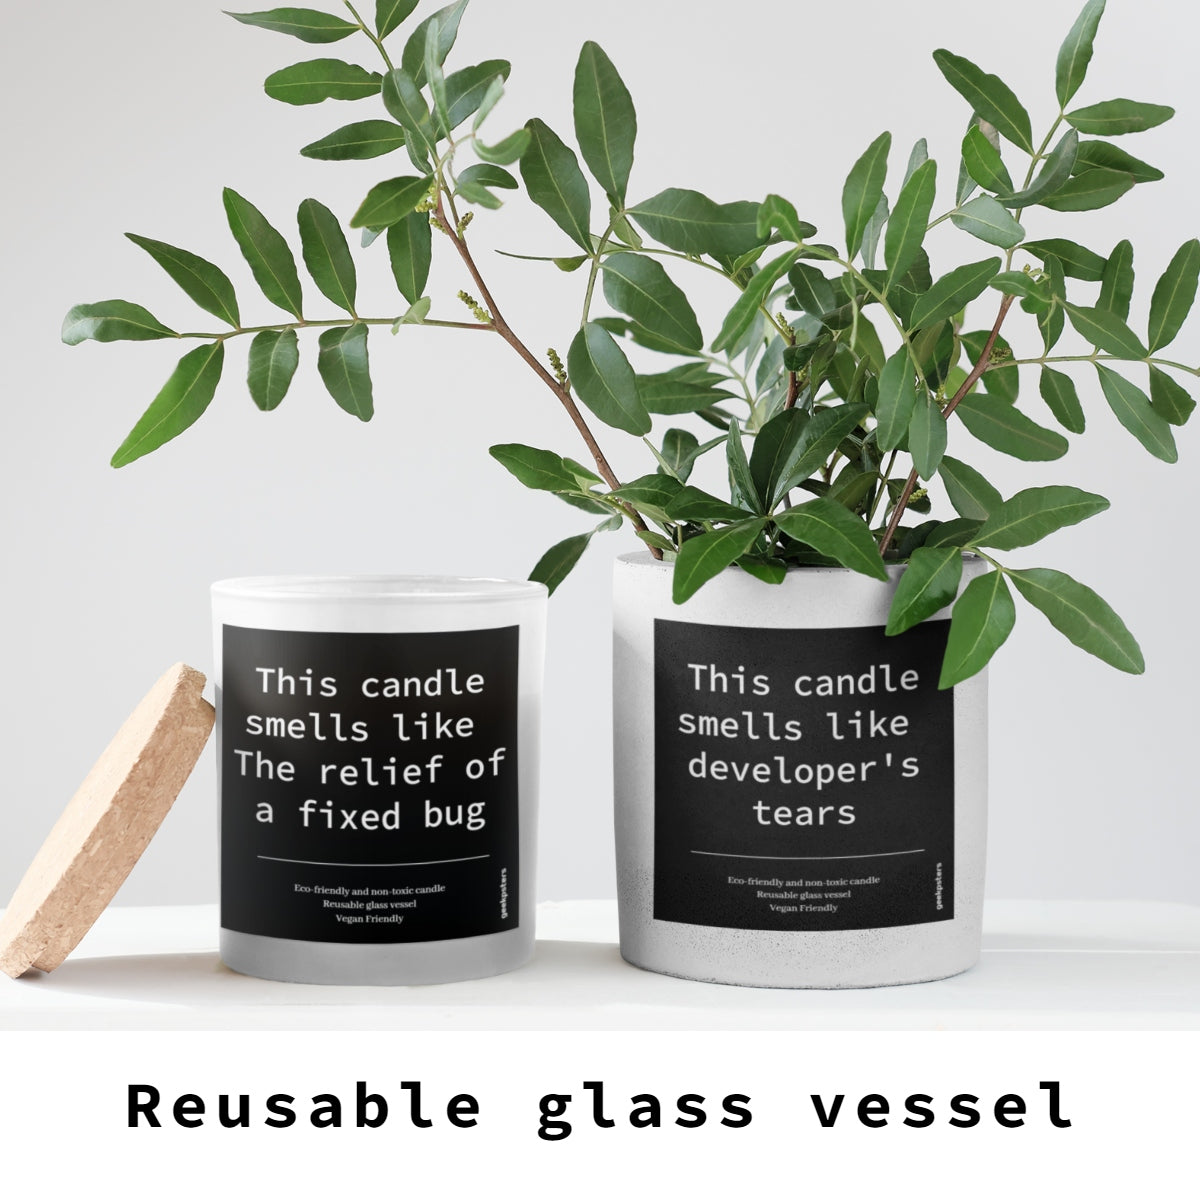 Two "This Candle Smells like a Successful Code Review" soy candles in reusable glass vessels with humorous labels, one reading "smells like the relief of a fixed bug" and the other "smells like developer's tears," with a green plant in.